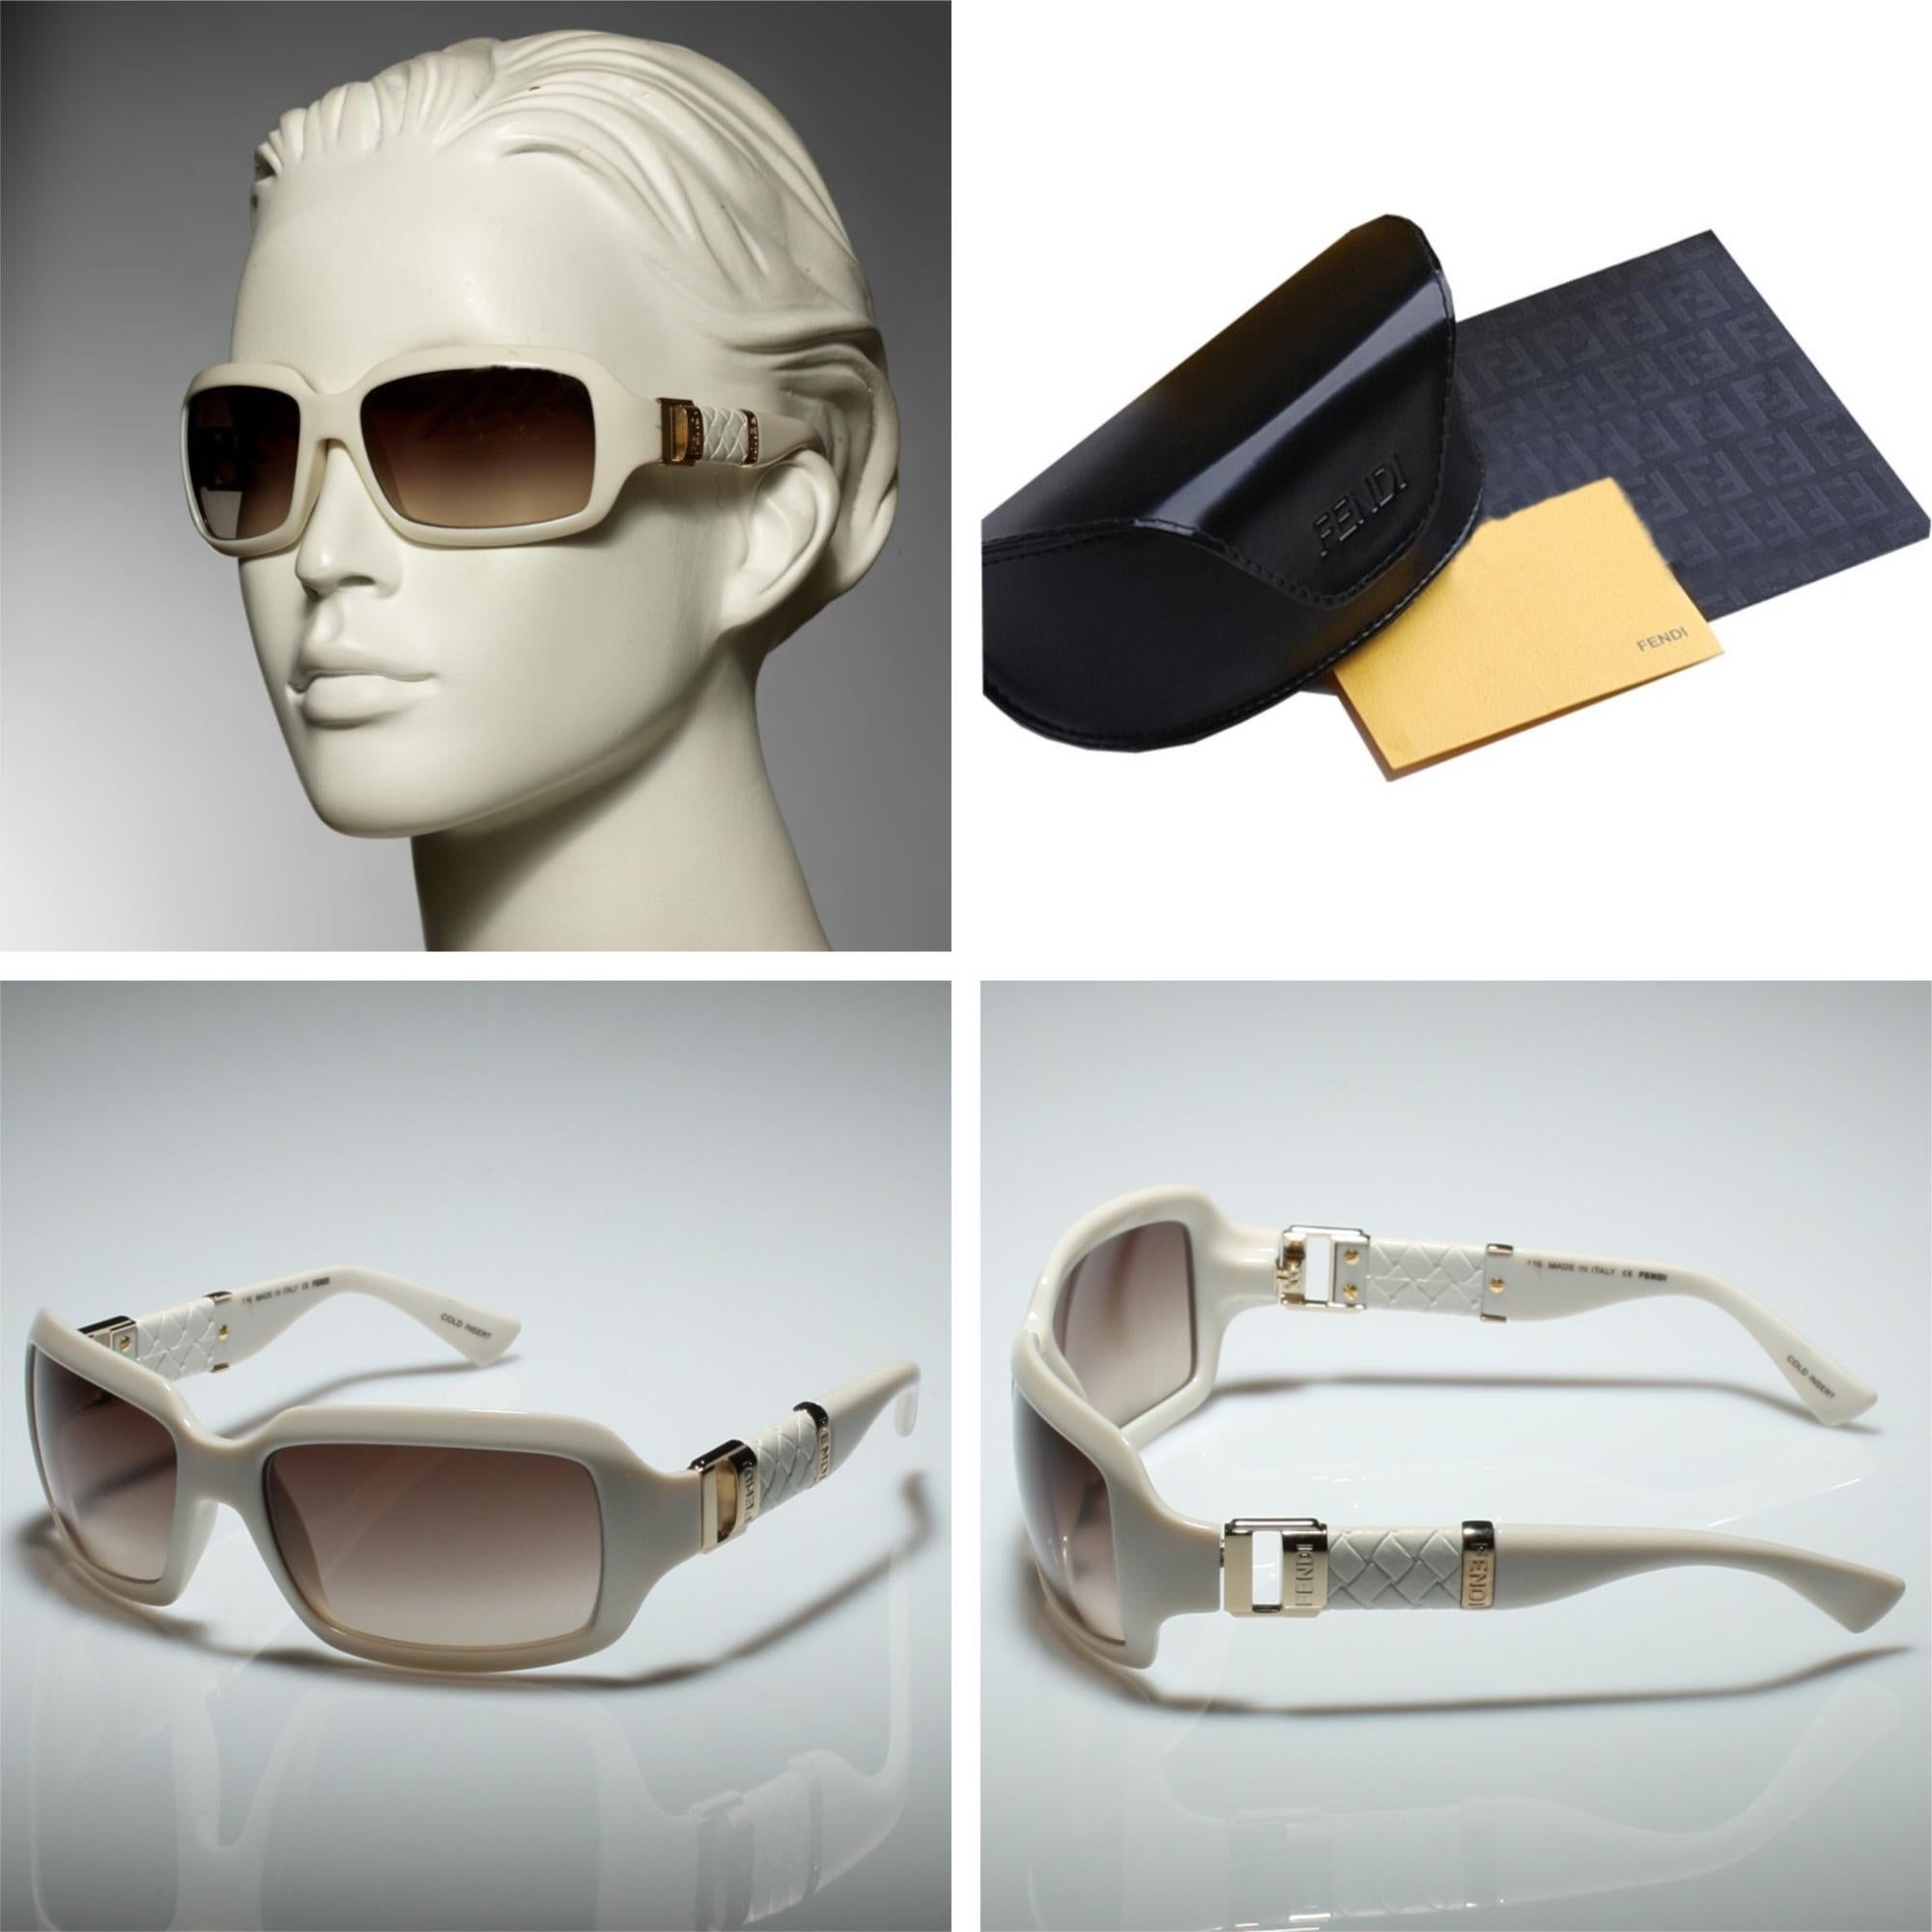 New Fendi Off White Sunglasses with Case

Brand New
Gold Hardware
Beautiful Off White Frames
59-17-115
Lightweight Scratch and Impact Resistant
Made in Italy
100% UVA/UVB Protection
Comes with Case & Cleaning Clothing